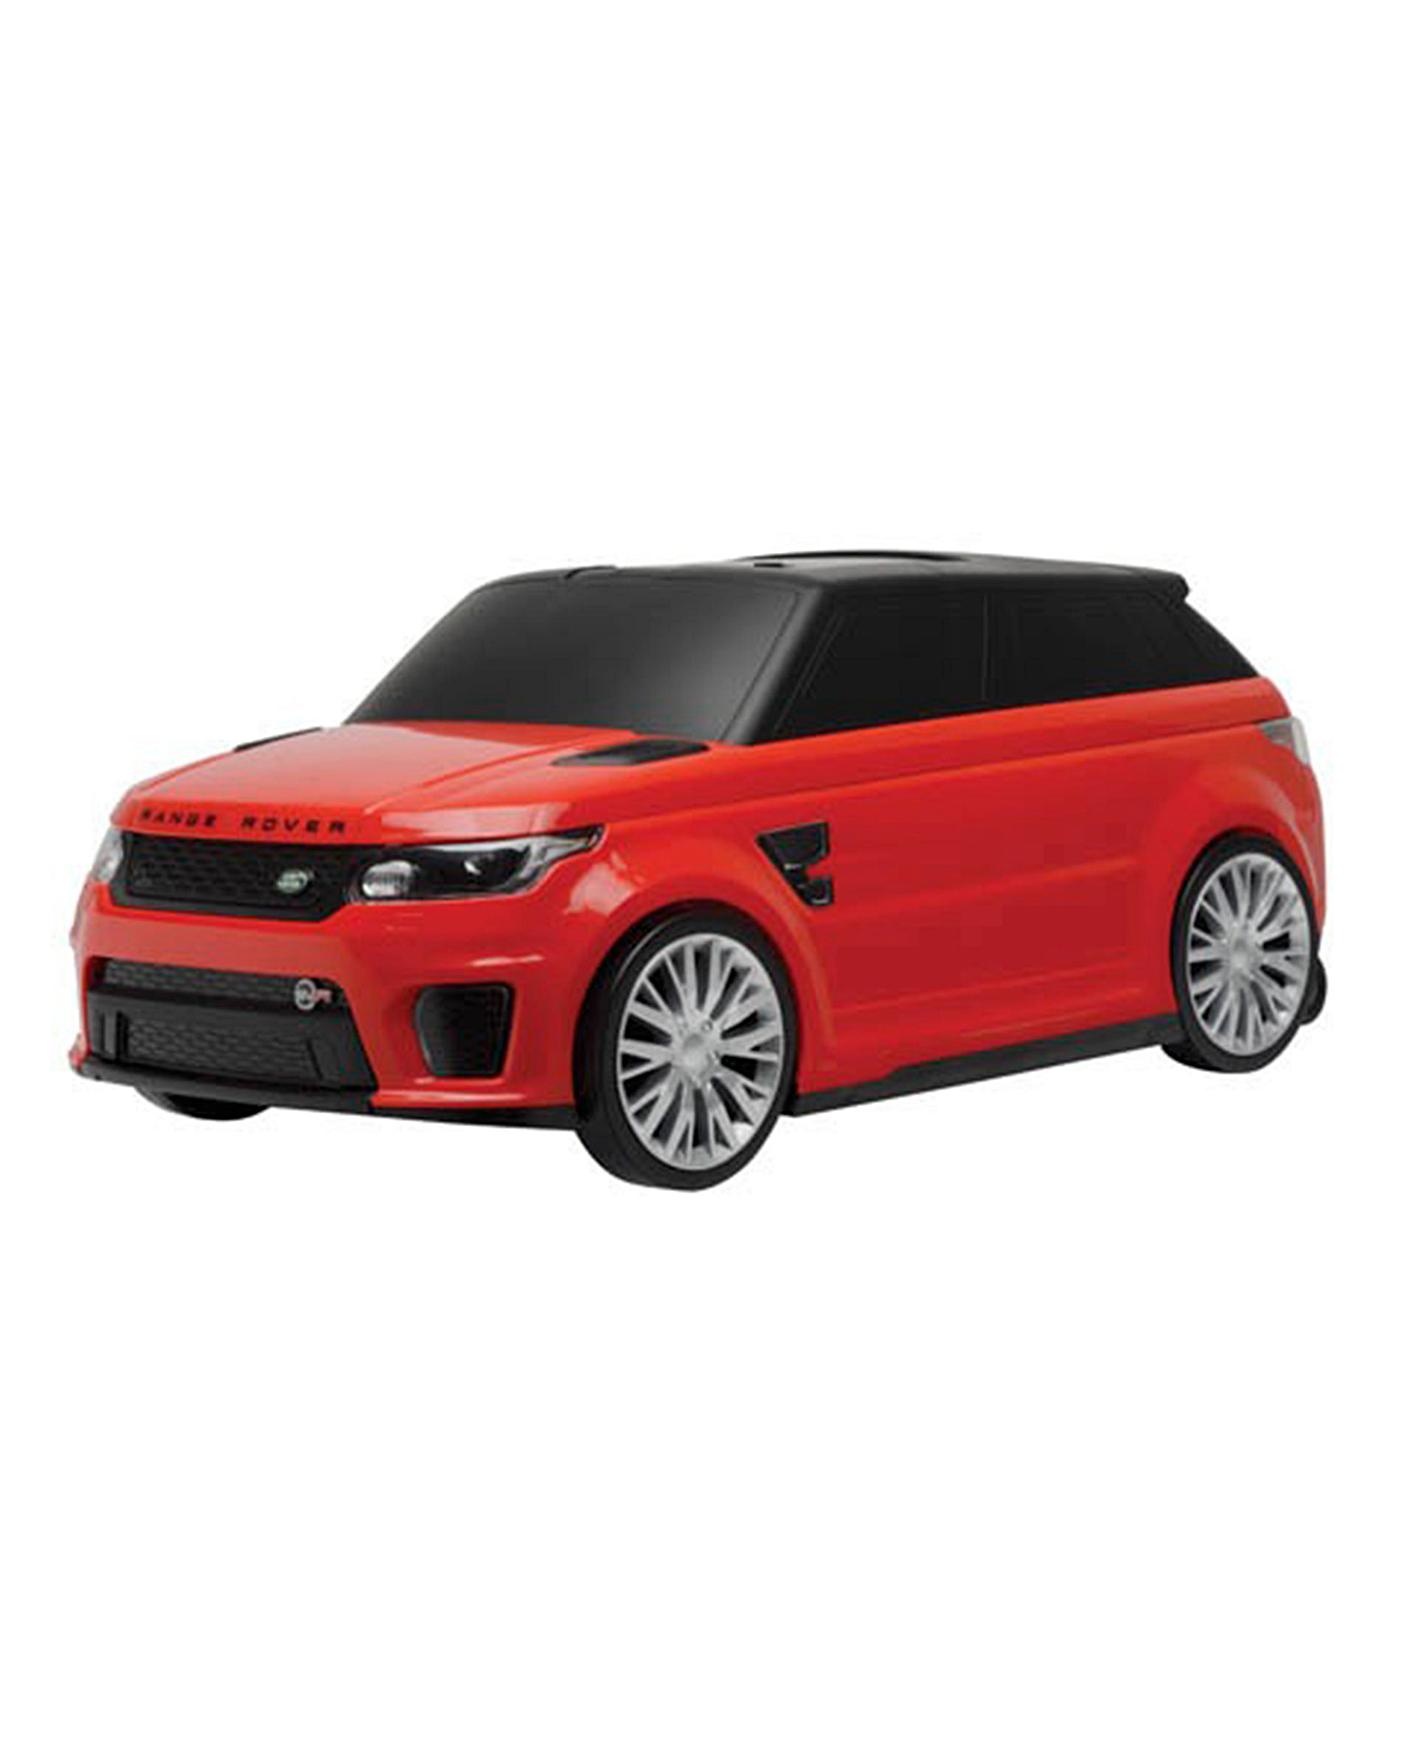 Range Rover Sport Kid Car  . What New Land Rover Should You Buy?